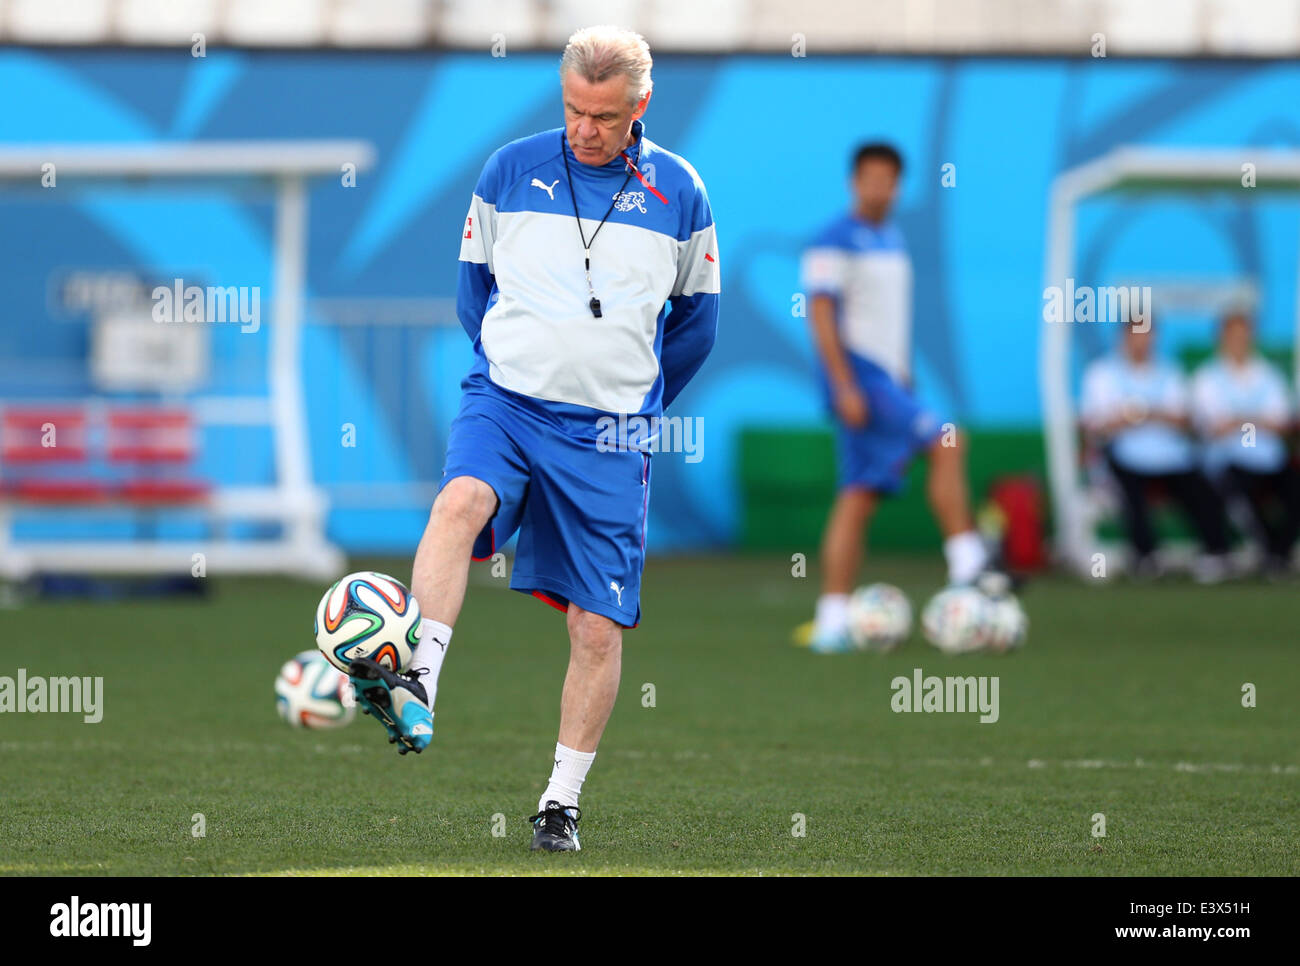 Sao Paulo, Brazil. 30th June, 2014. Switzerland's Ottmar Hitzfeld is seen in a training session in Sao Paulo, Brazil, on June 30, 2014. Switzerland will face Argentina here in a Round of 16 match of 2014 FIFA World Cup on Tuesday. © TELAM/Xinhua/Alamy Live News Stock Photo